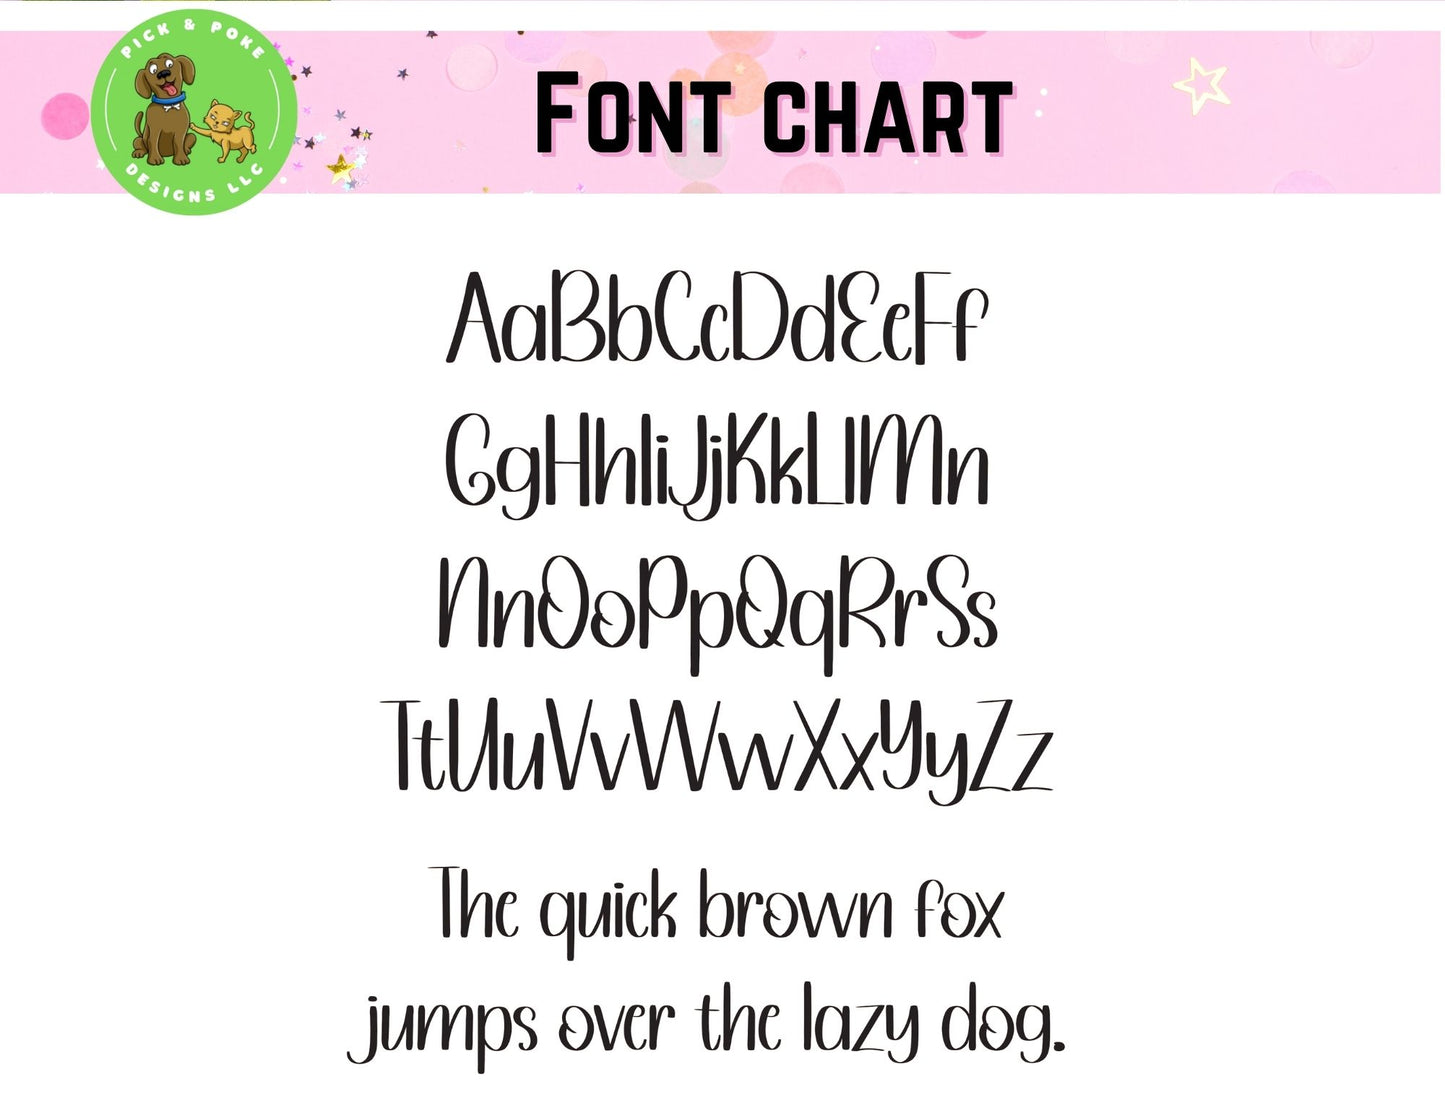 Font chart depicting the hand lettering font used on the teacher mug